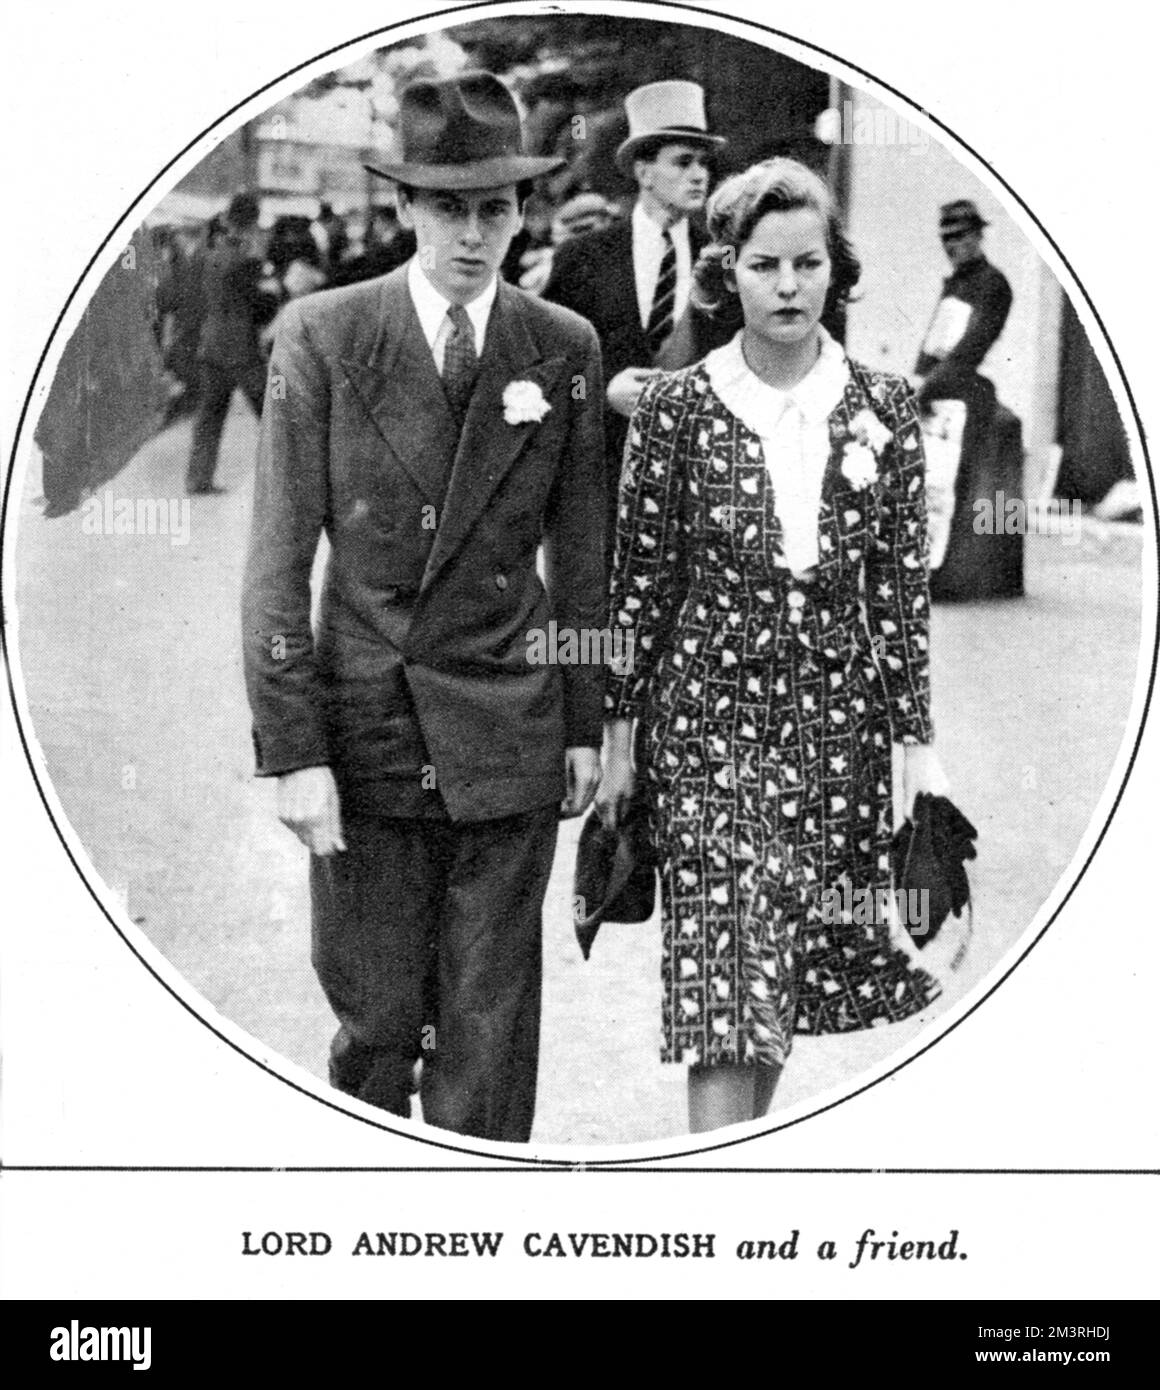 Lord Andrew Cavendish, pictured with a woman described as, 'a friend,' in fact, Deborah Freeman Mitford, his future wife.  Andrew Robert Buxton Cavendish, 11th Duke of Devonshire (1920-2004), aristocrat and landowner was second son of the 10th Duke of Devonshire.  Together with his wife, Deborah Mitford, he was responsible for restoring Chatsworth House to its former glories.     Date: 1939 Stock Photo